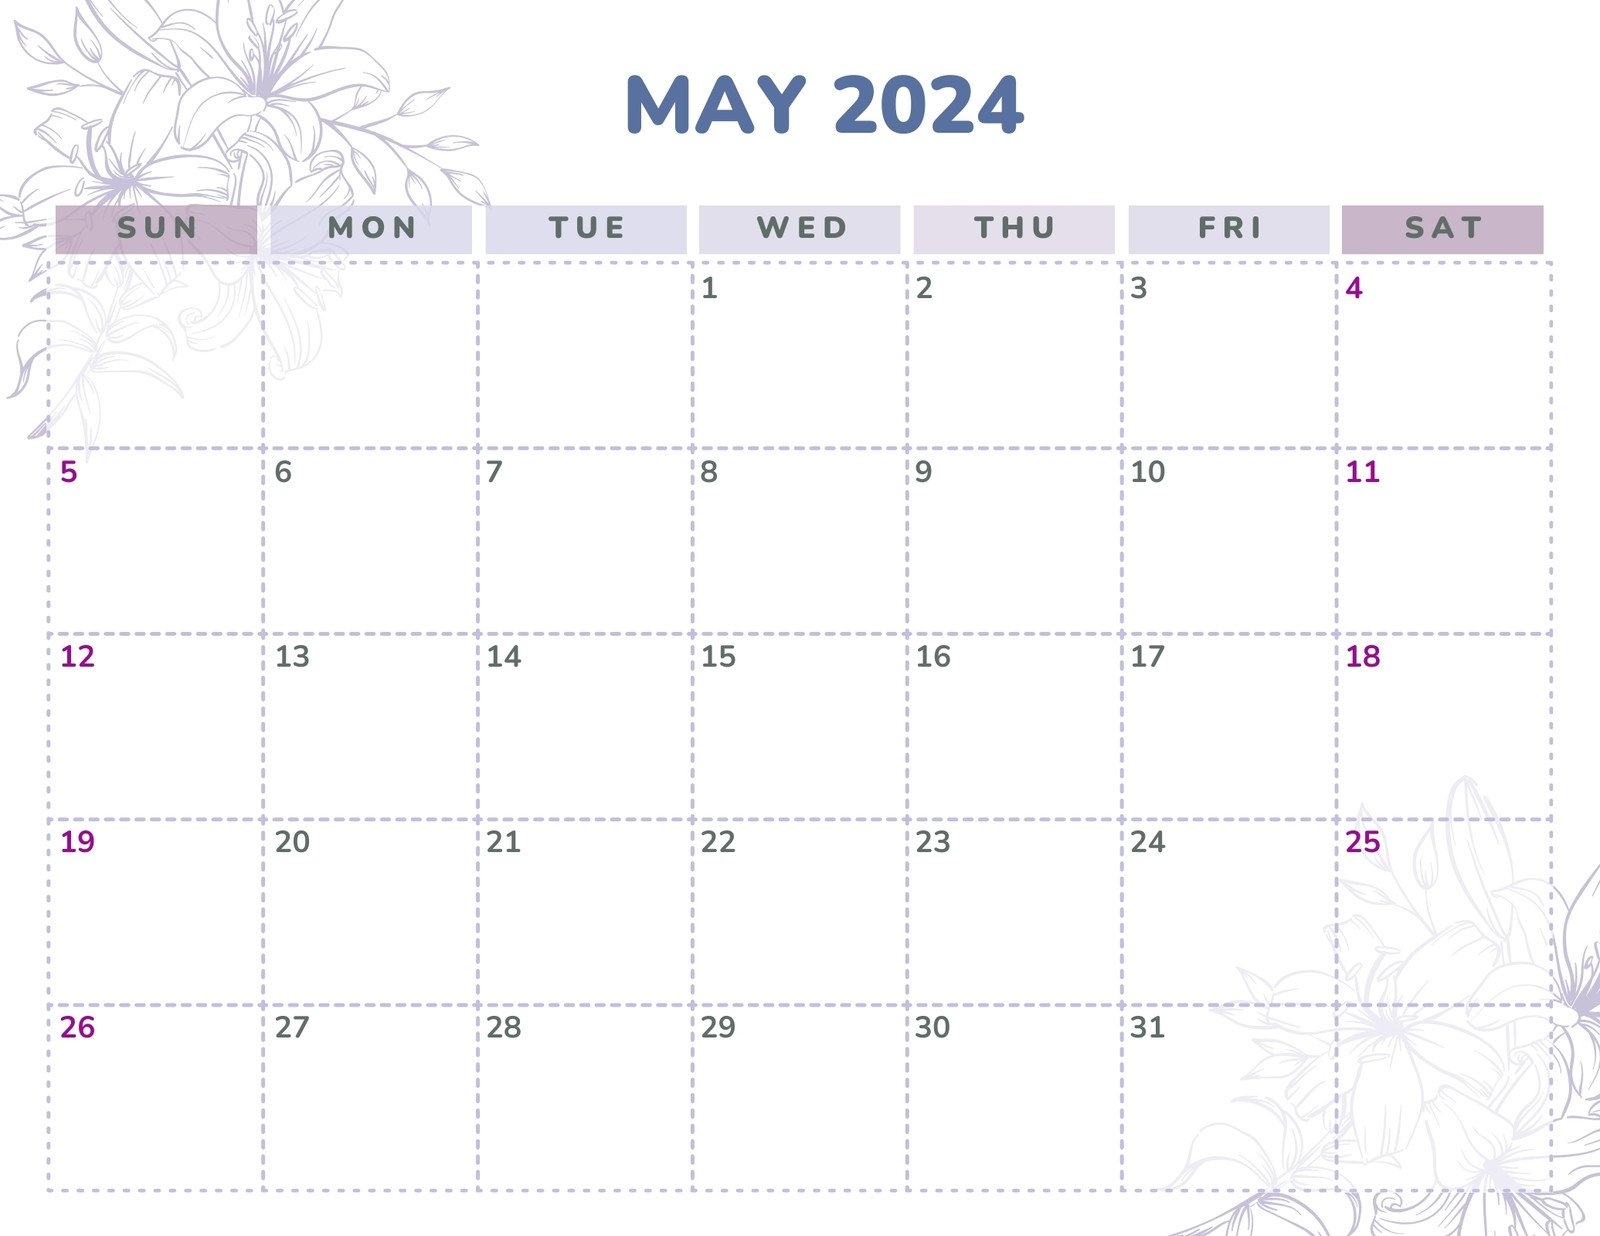 Free And Customizable Calendar Templates | Canva for Free Printable Calendar 2024 That I Can Edit